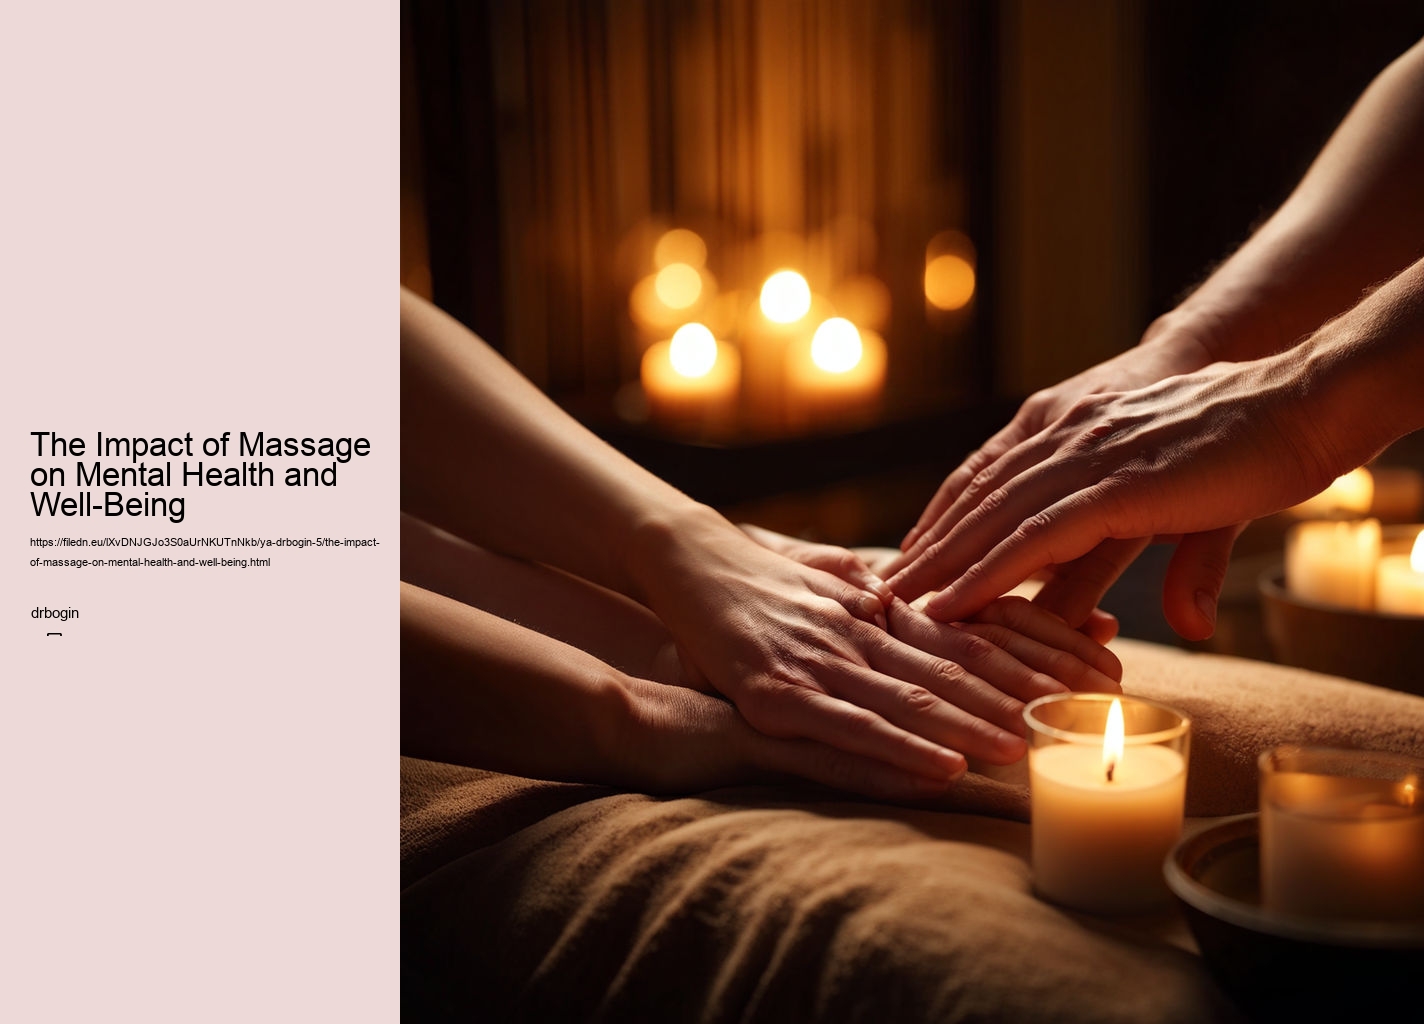 The Impact of Massage on Mental Health and Well-Being